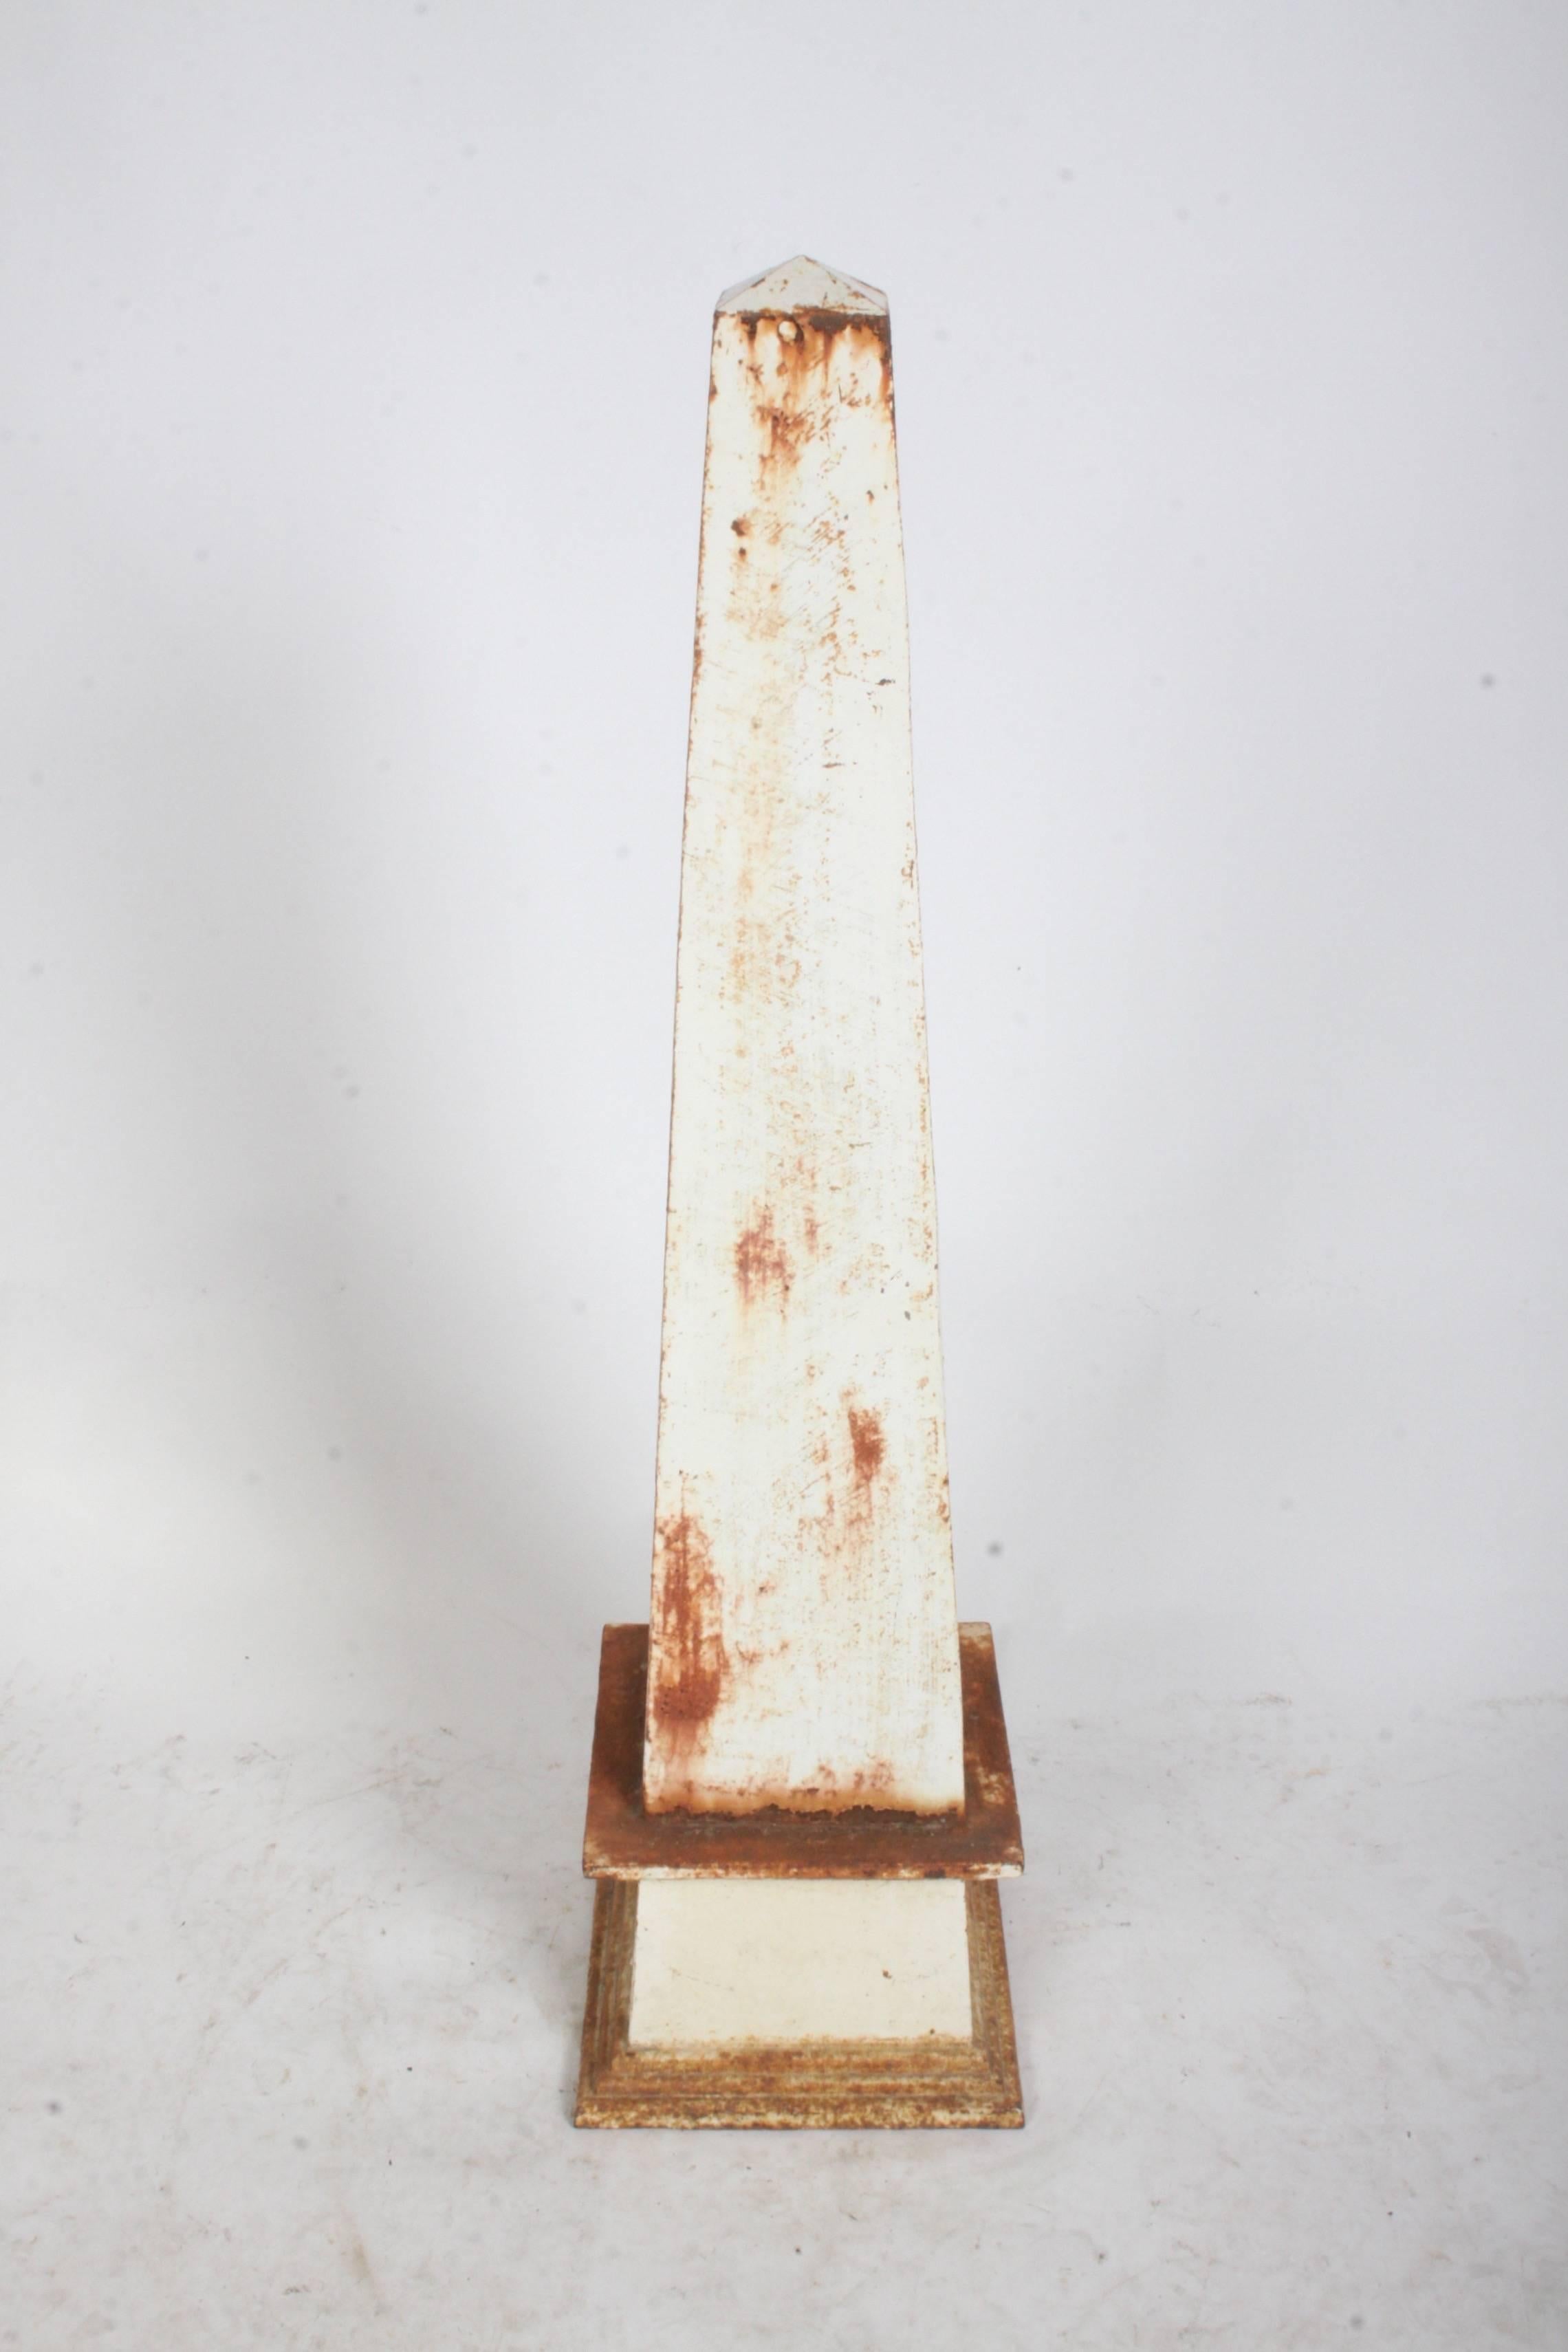 Late 19th c. or early 20th c. cast iron architectural garden obelisk. Nice decorative item for any garden or home. 